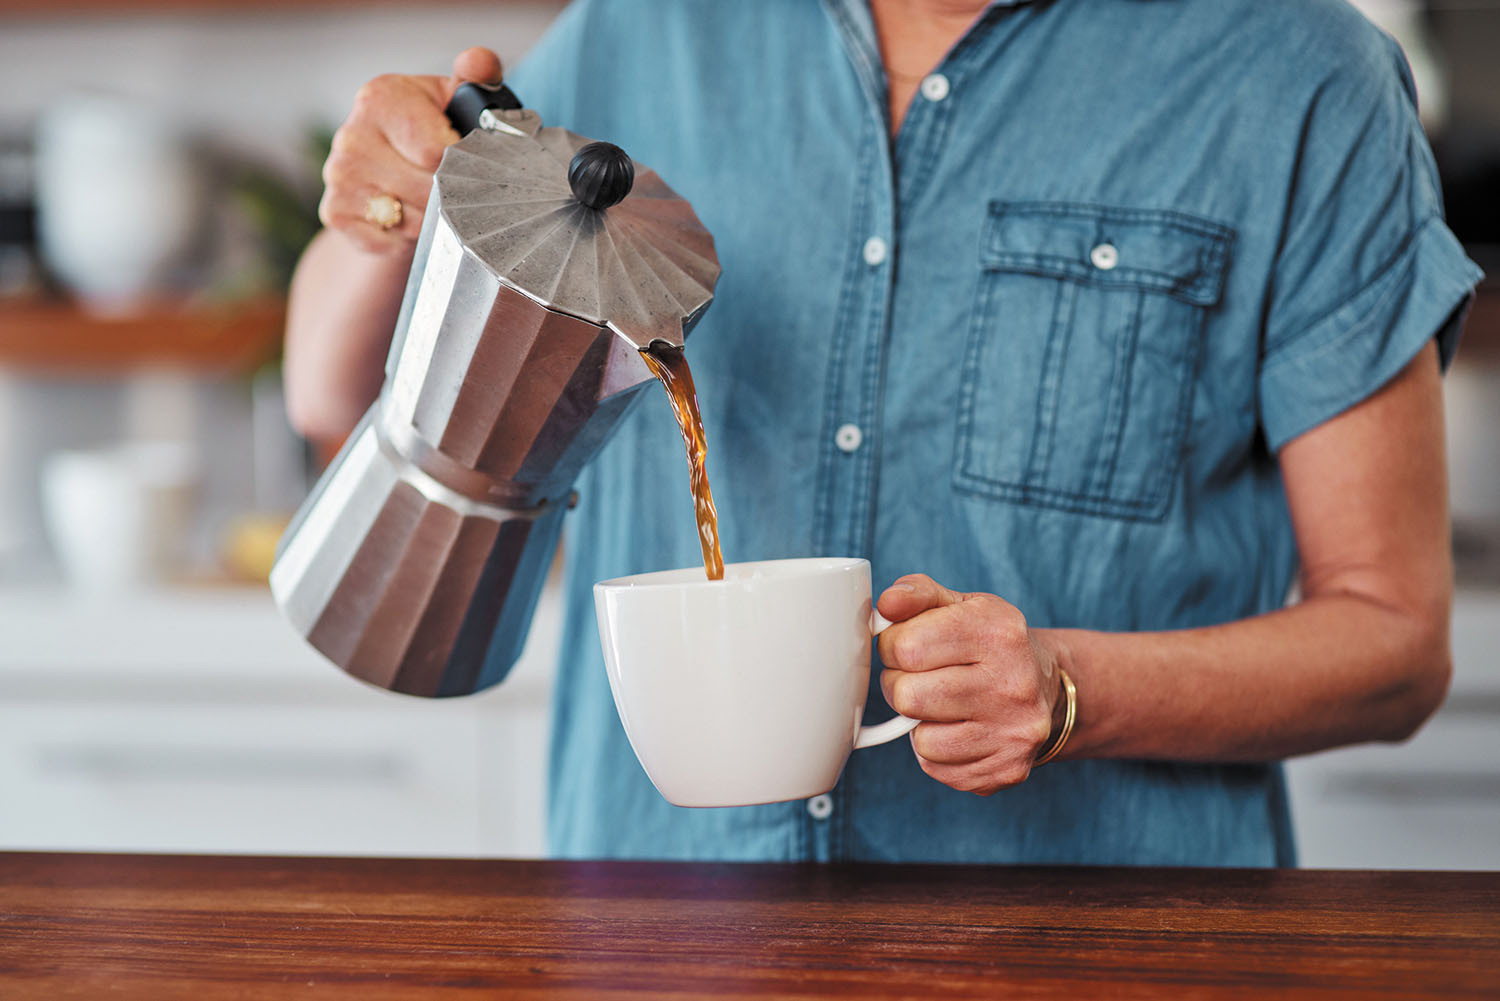 cropped photo showing the torso and arms of a woman pouring coffee from a pot into a white mug